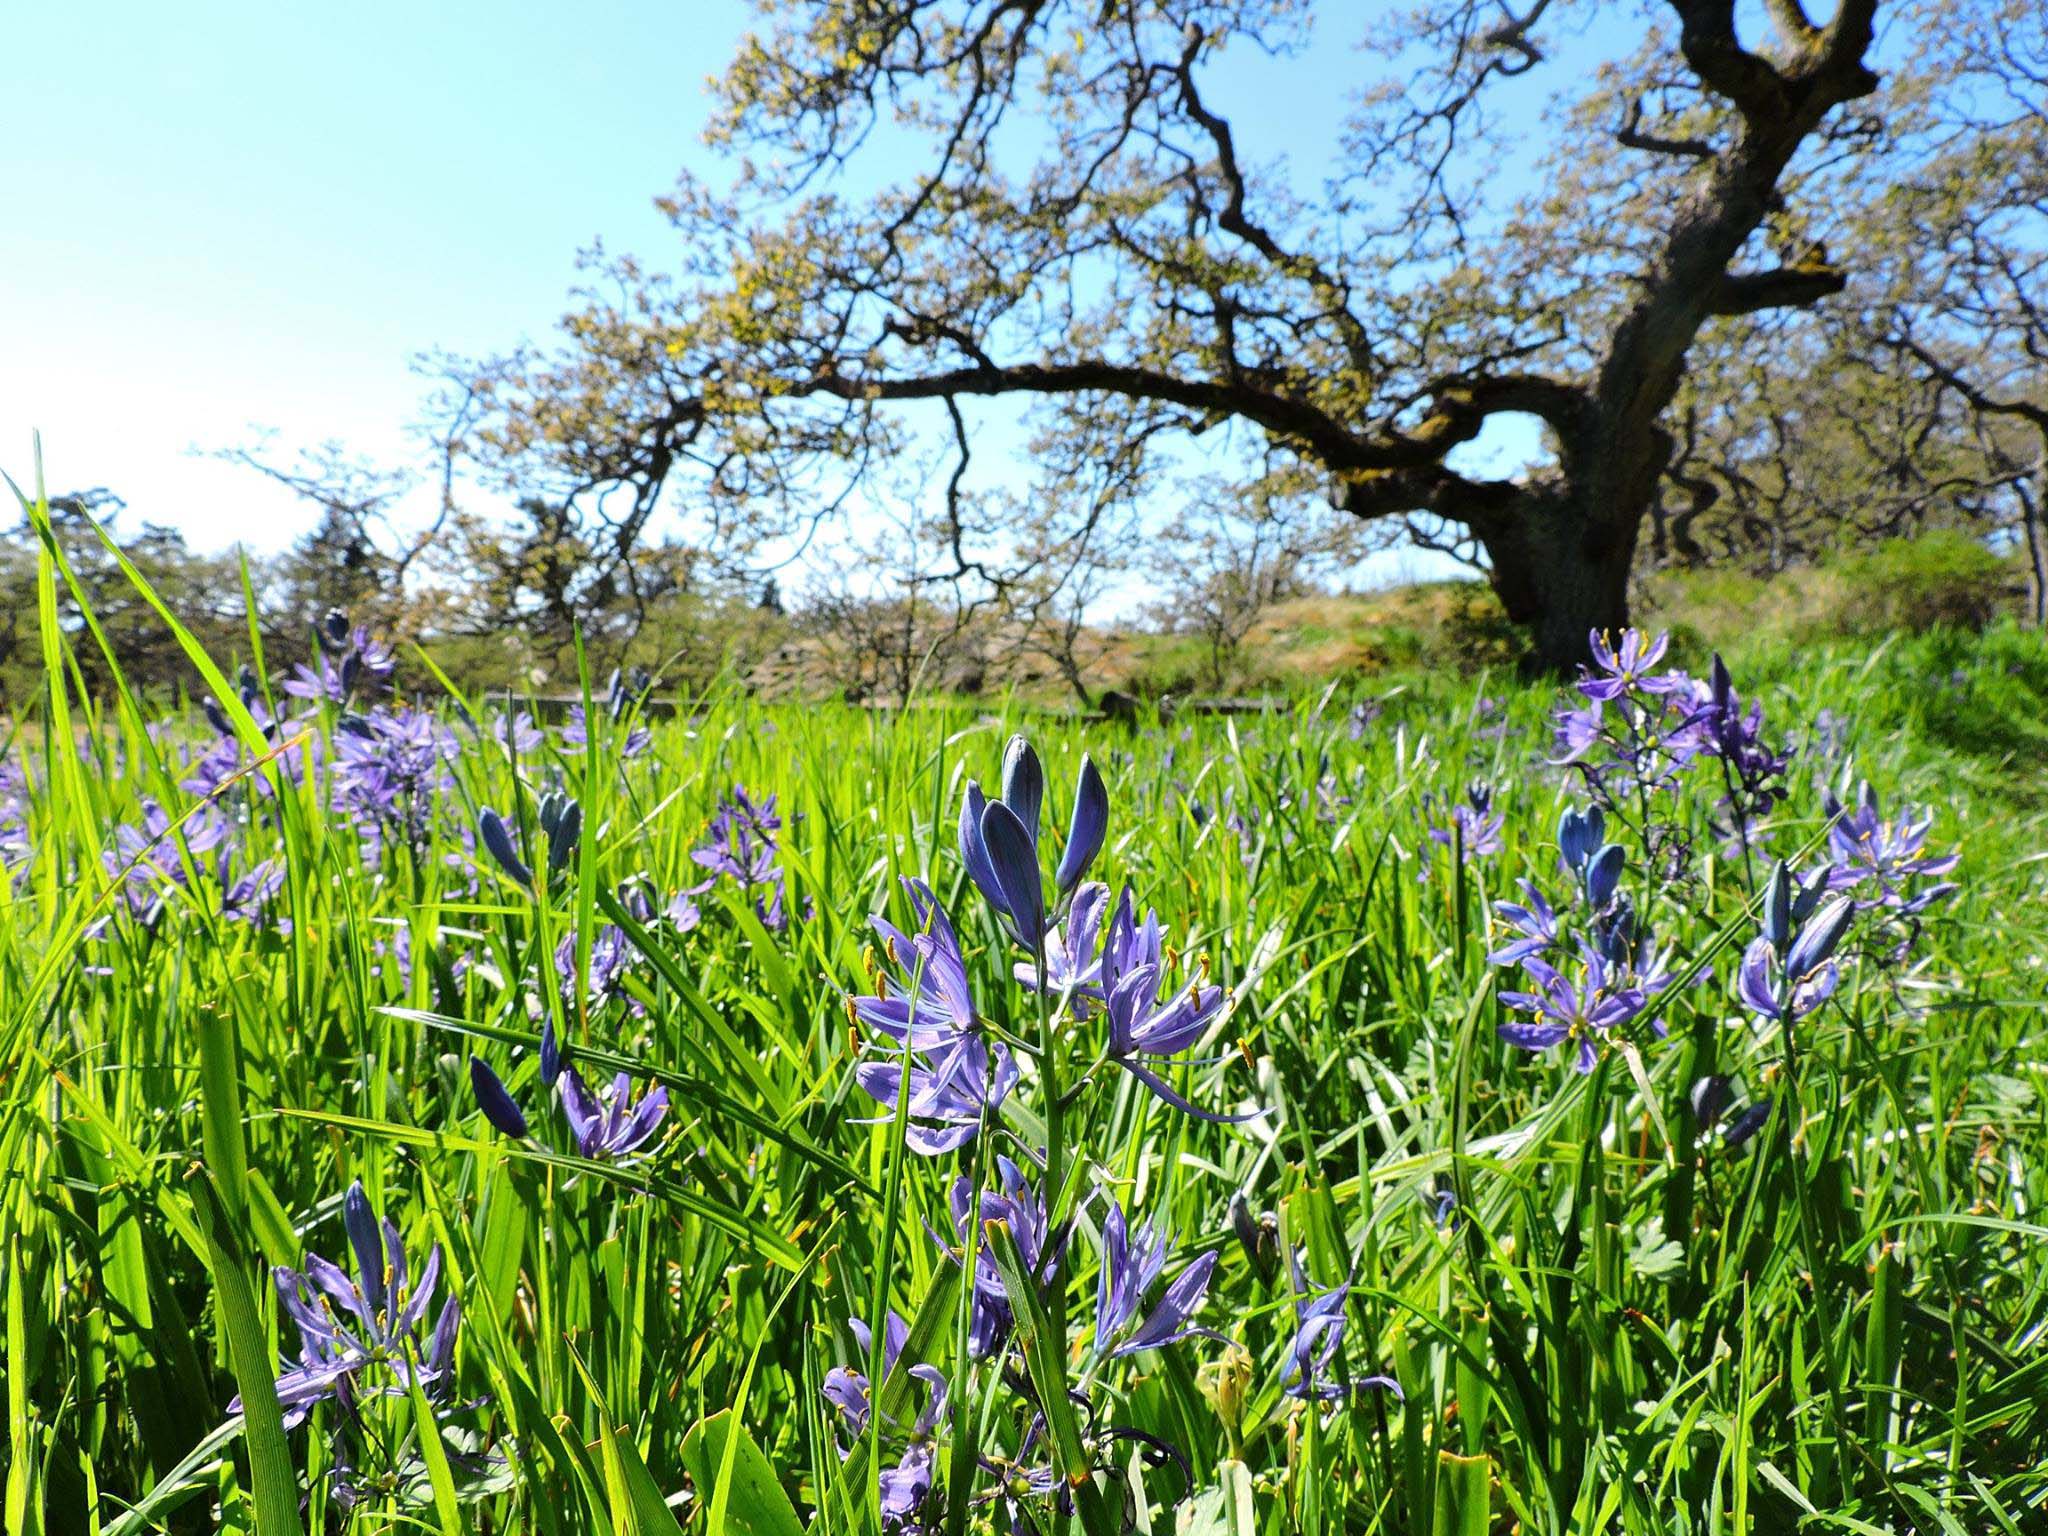 purple flowers and green grass in the foreground, a large tree and blue sky in the background